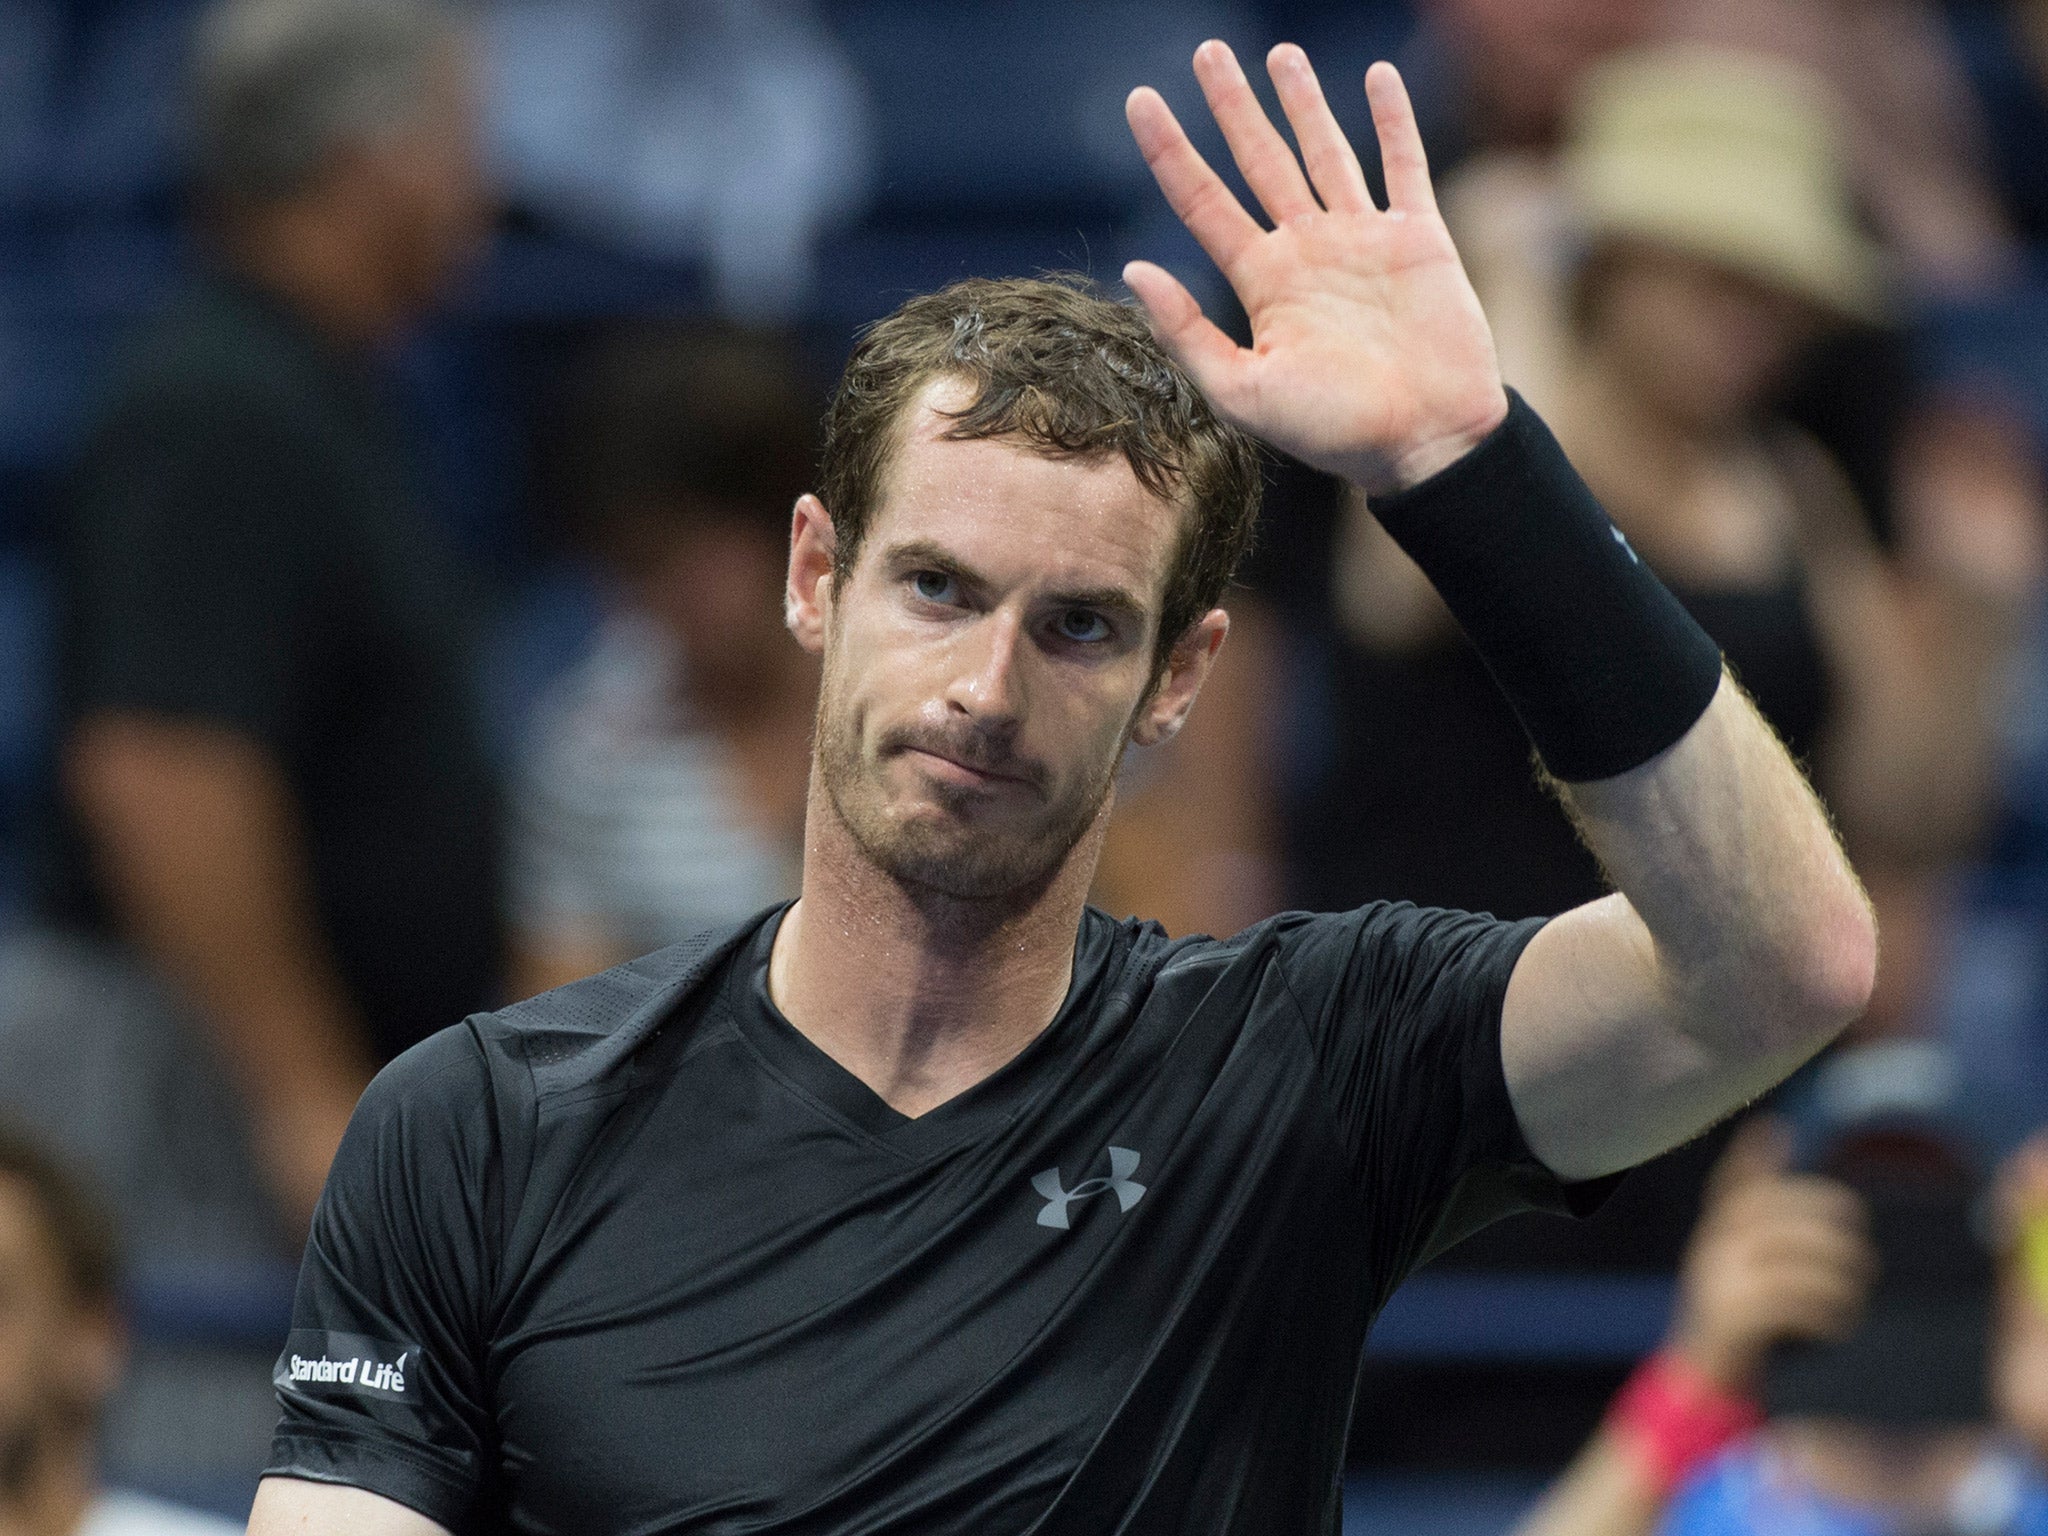 US Open Andy Murray continues relentless form to ease past Lukas Rosol